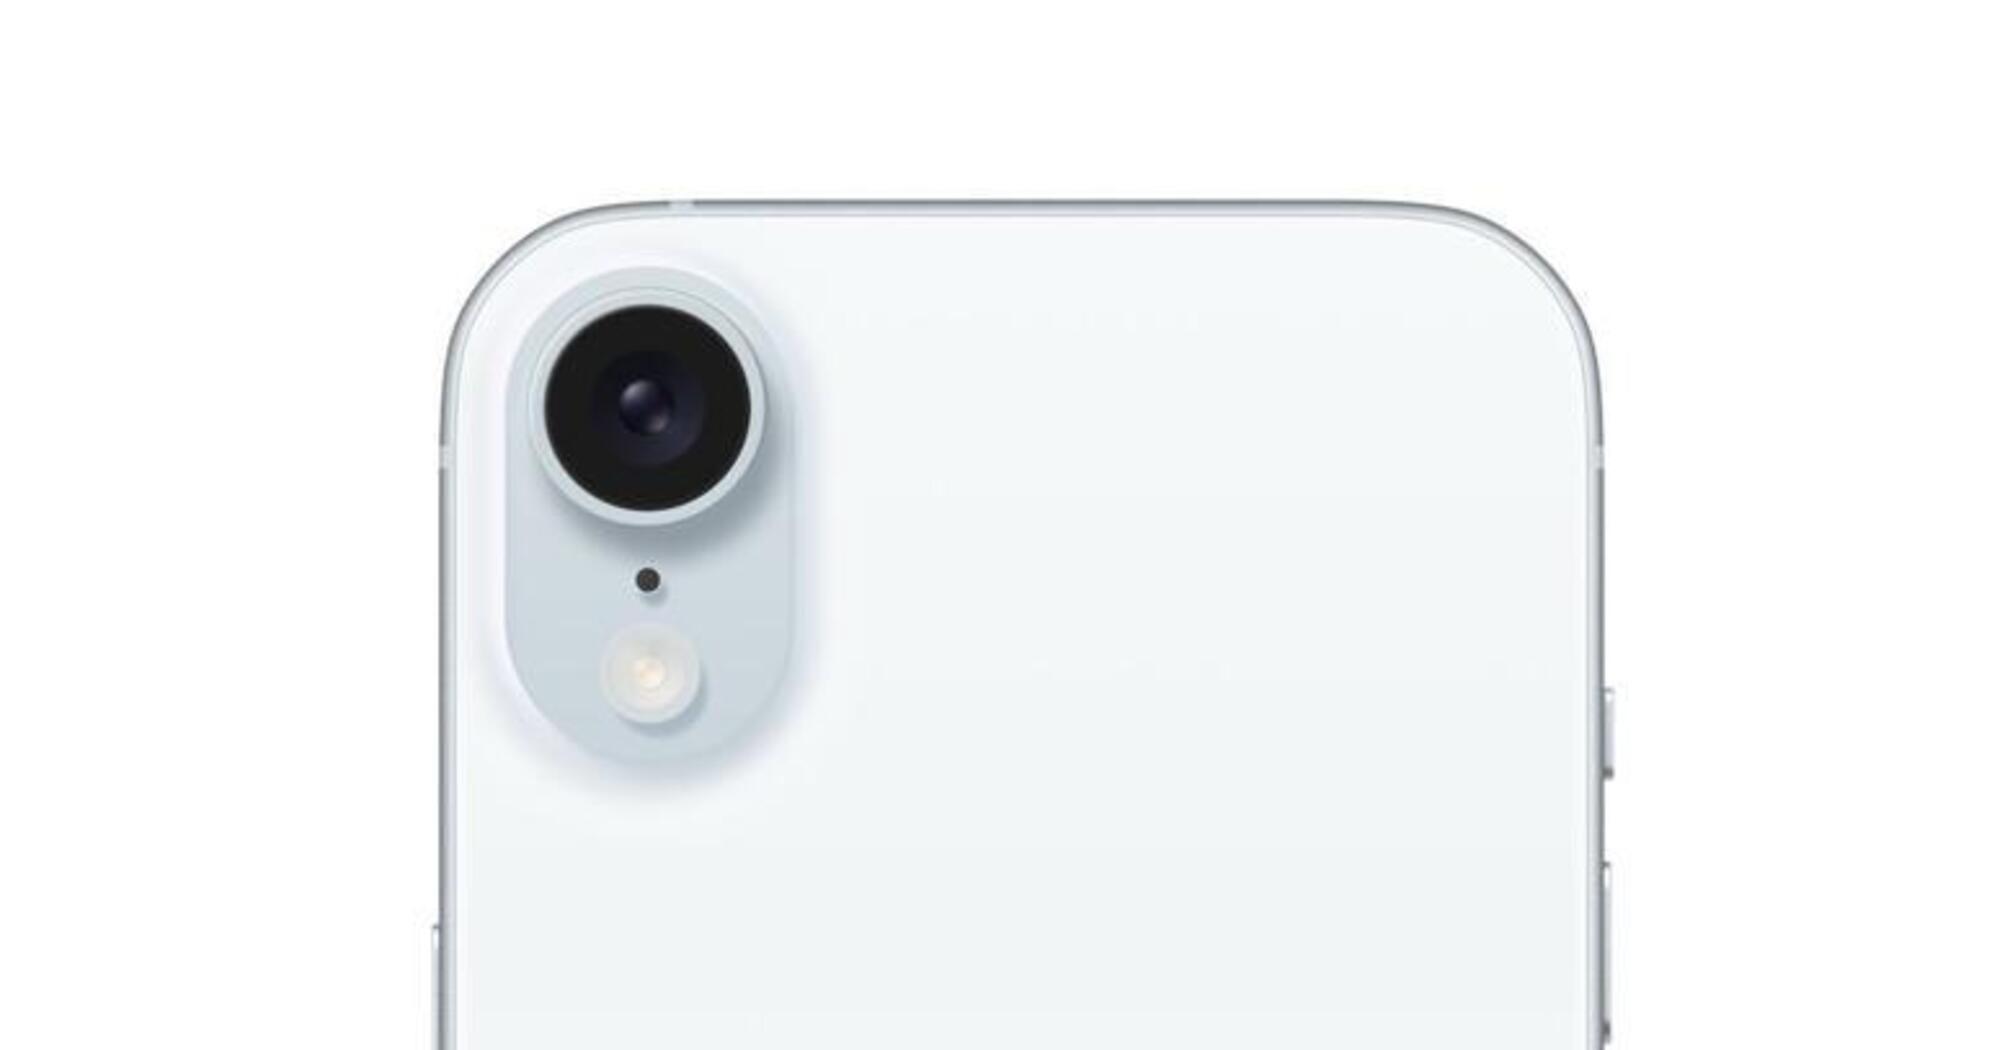 The new iPhone SE will get Dynamic Island and a vertical camera unit: what is known